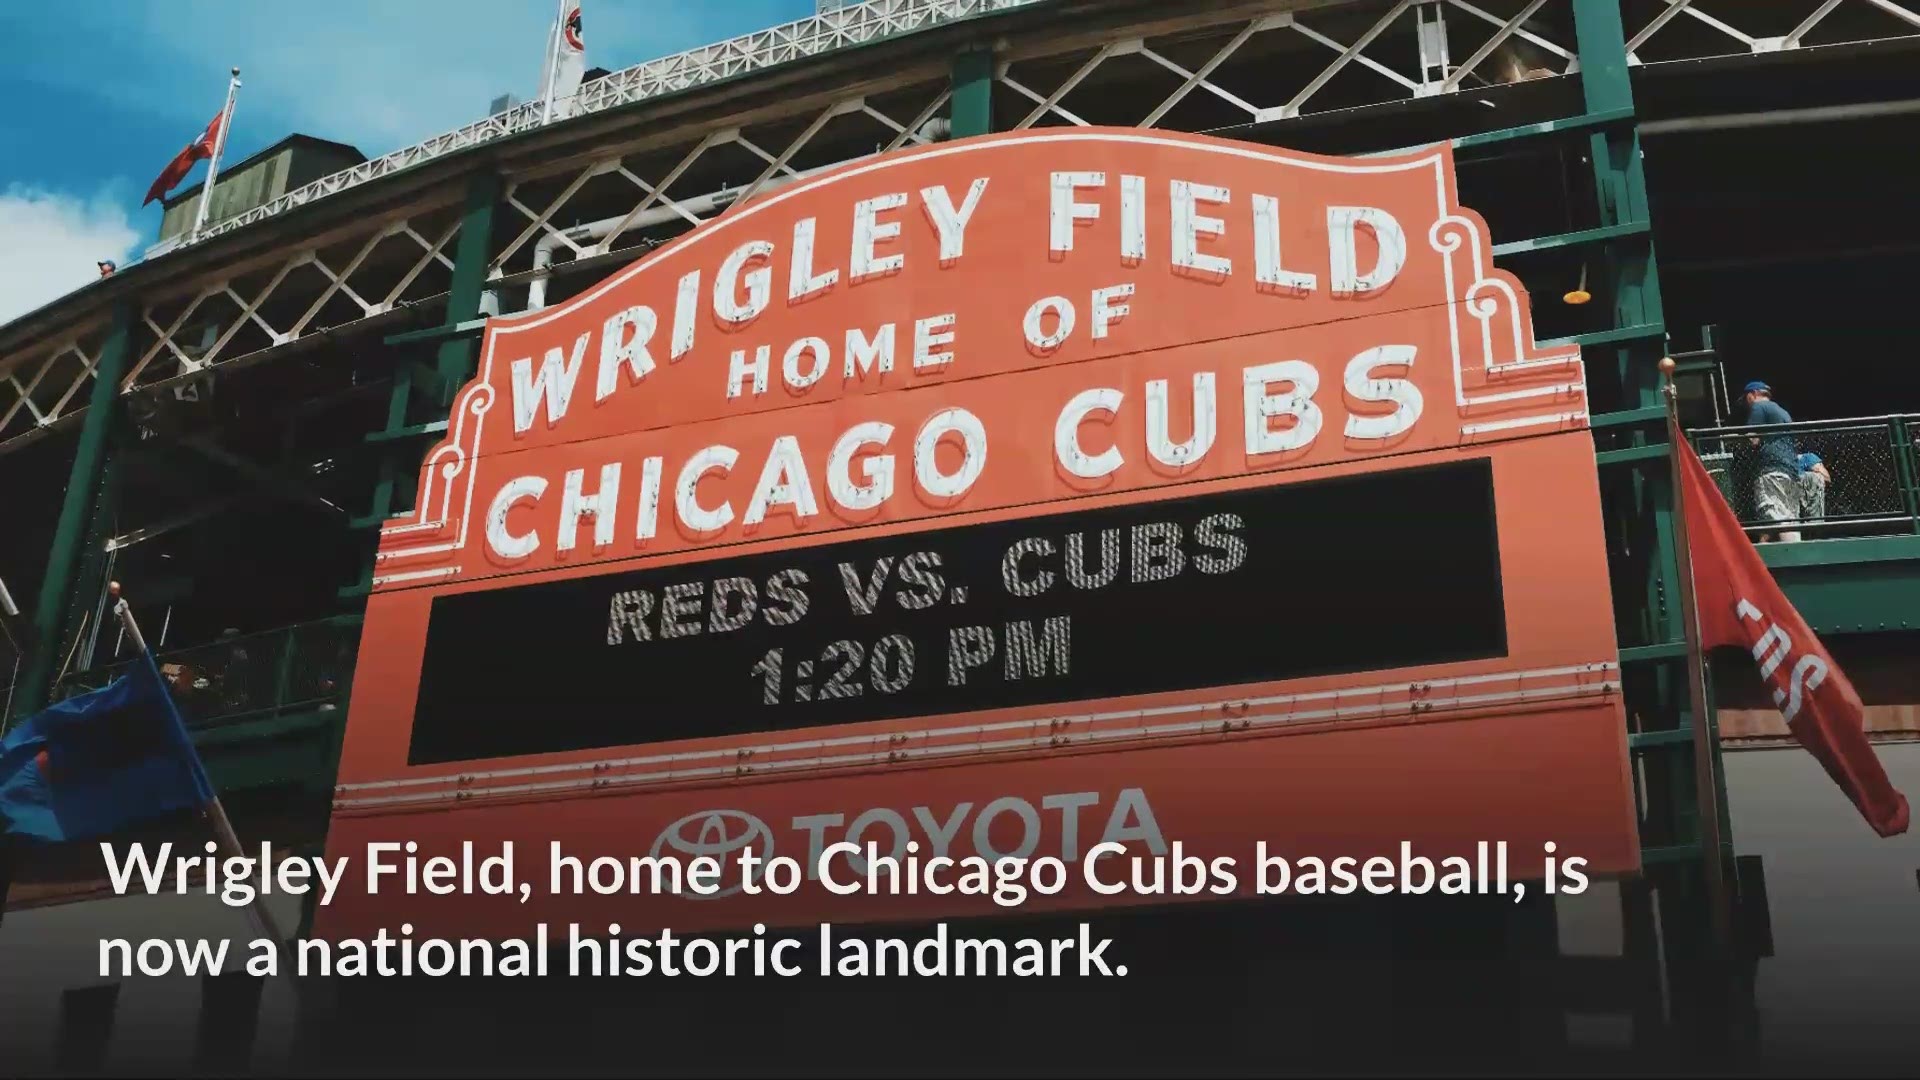 Wrigley Field is now a national historic landmark